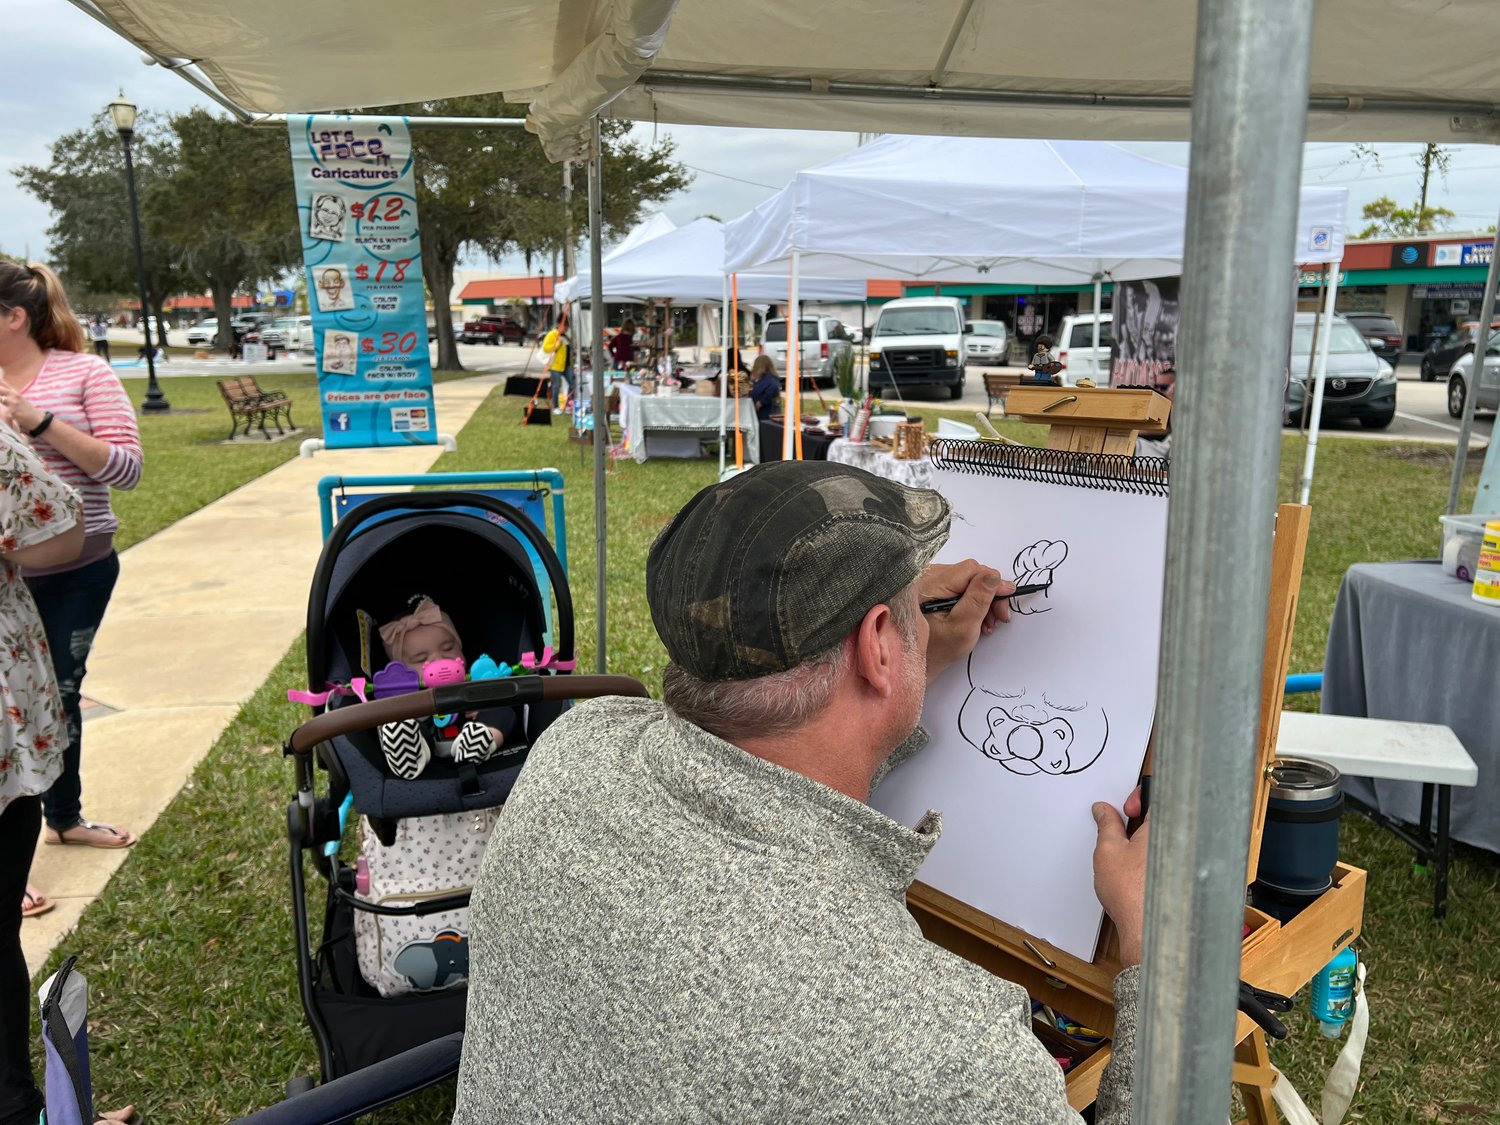 Jim Weckbacher travels all over the country doing caricatures at various festivals.